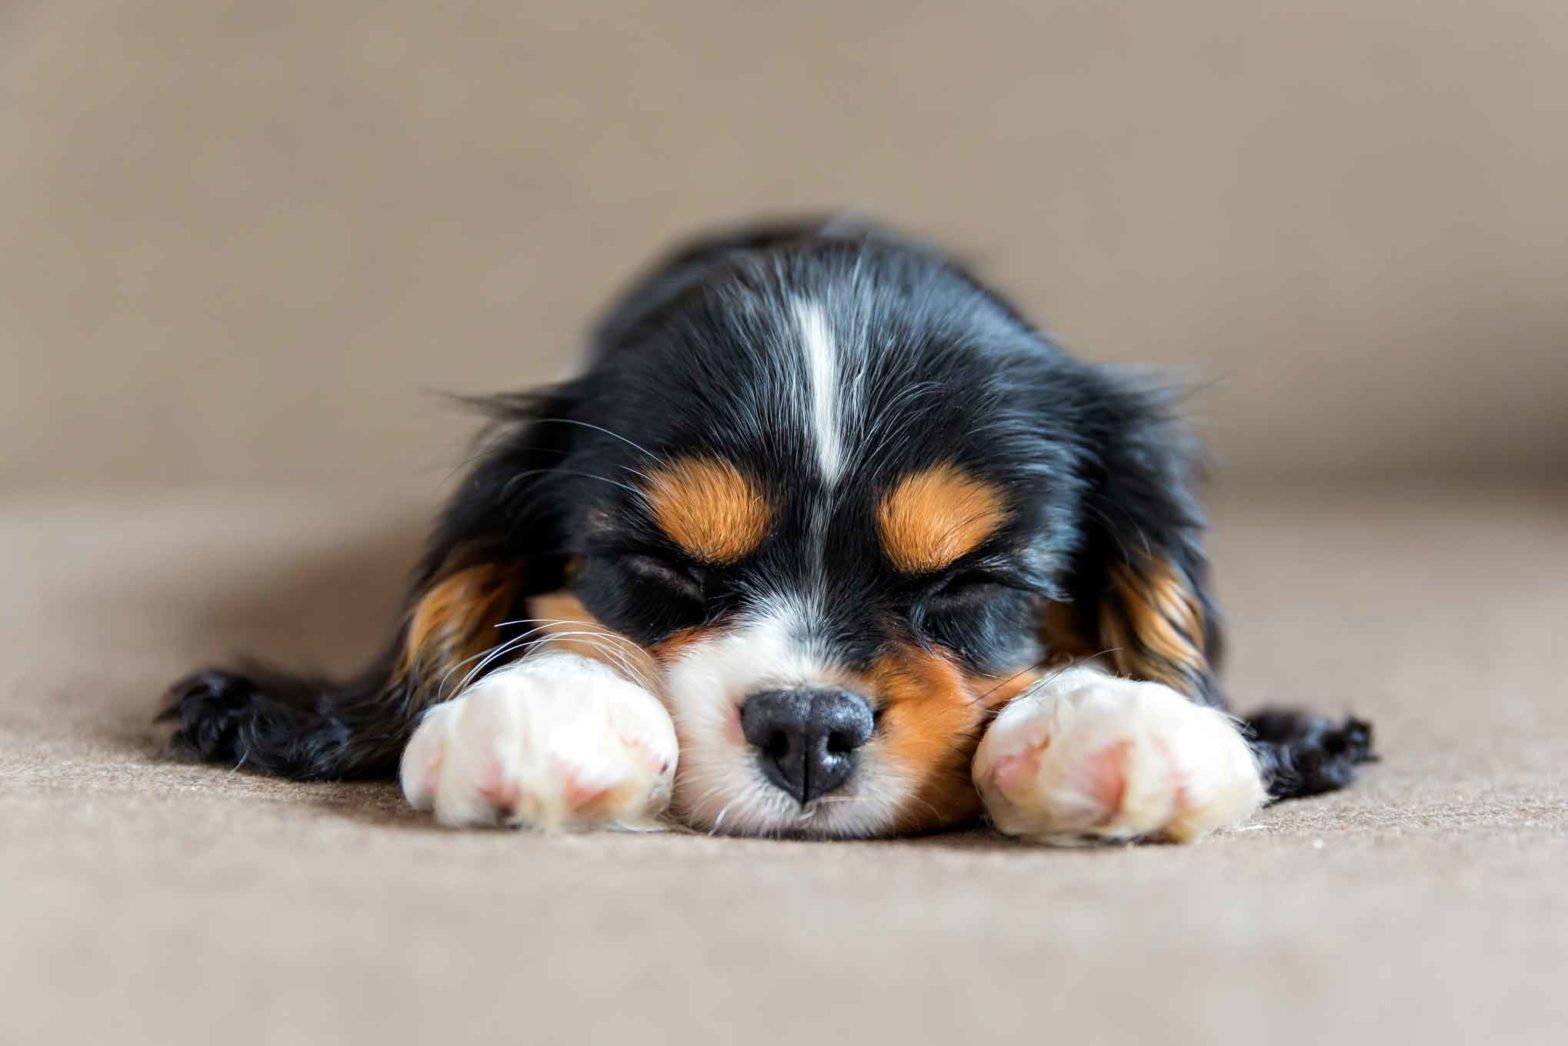 Cavalier puppy sleeping with head on paws